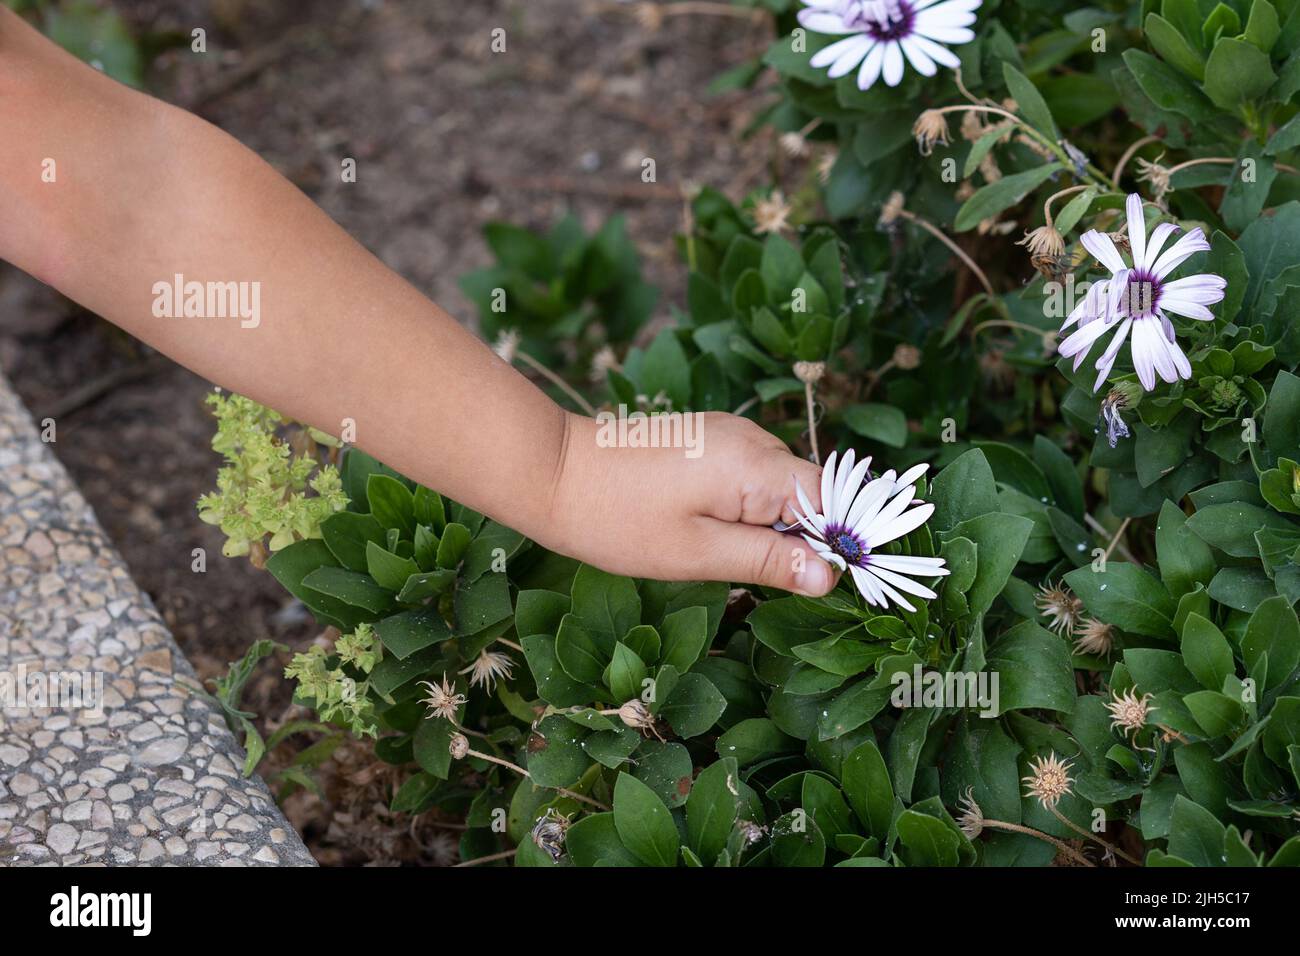 Close-up of child hand picking flowers from plant. Stock Photo